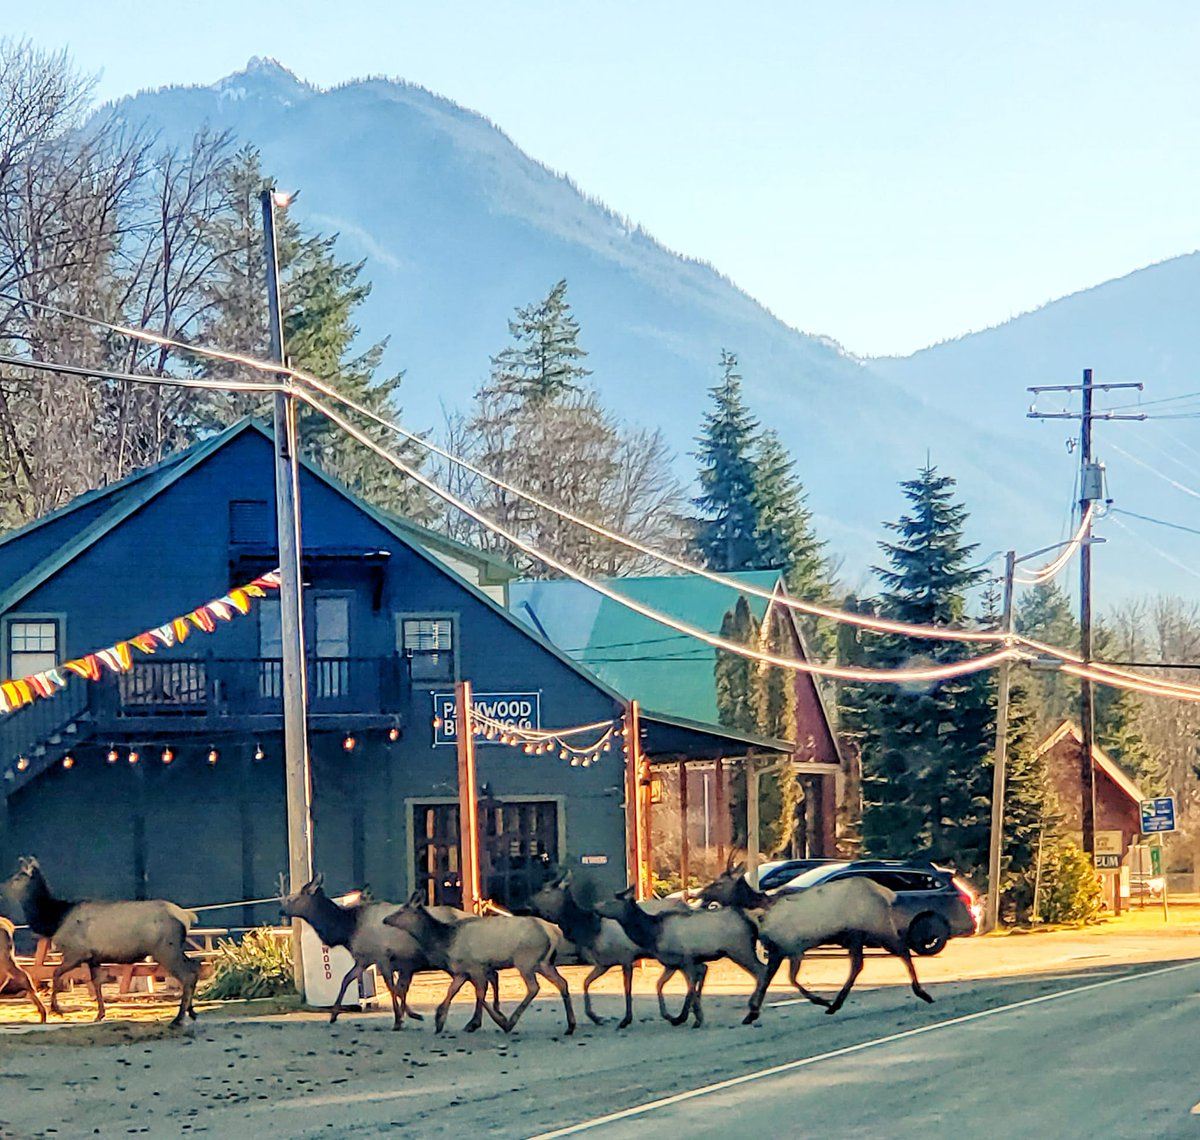 Looks like the elk are taking their sweet time on their commute in Packwood! 🦌🚗 Don't honk; just let them enjoy the scenery. While you're at it, make sure to follow the principles of leave no trace! Don't feed the elk, keep wildlife wild.🌲 #recreateresponsibly